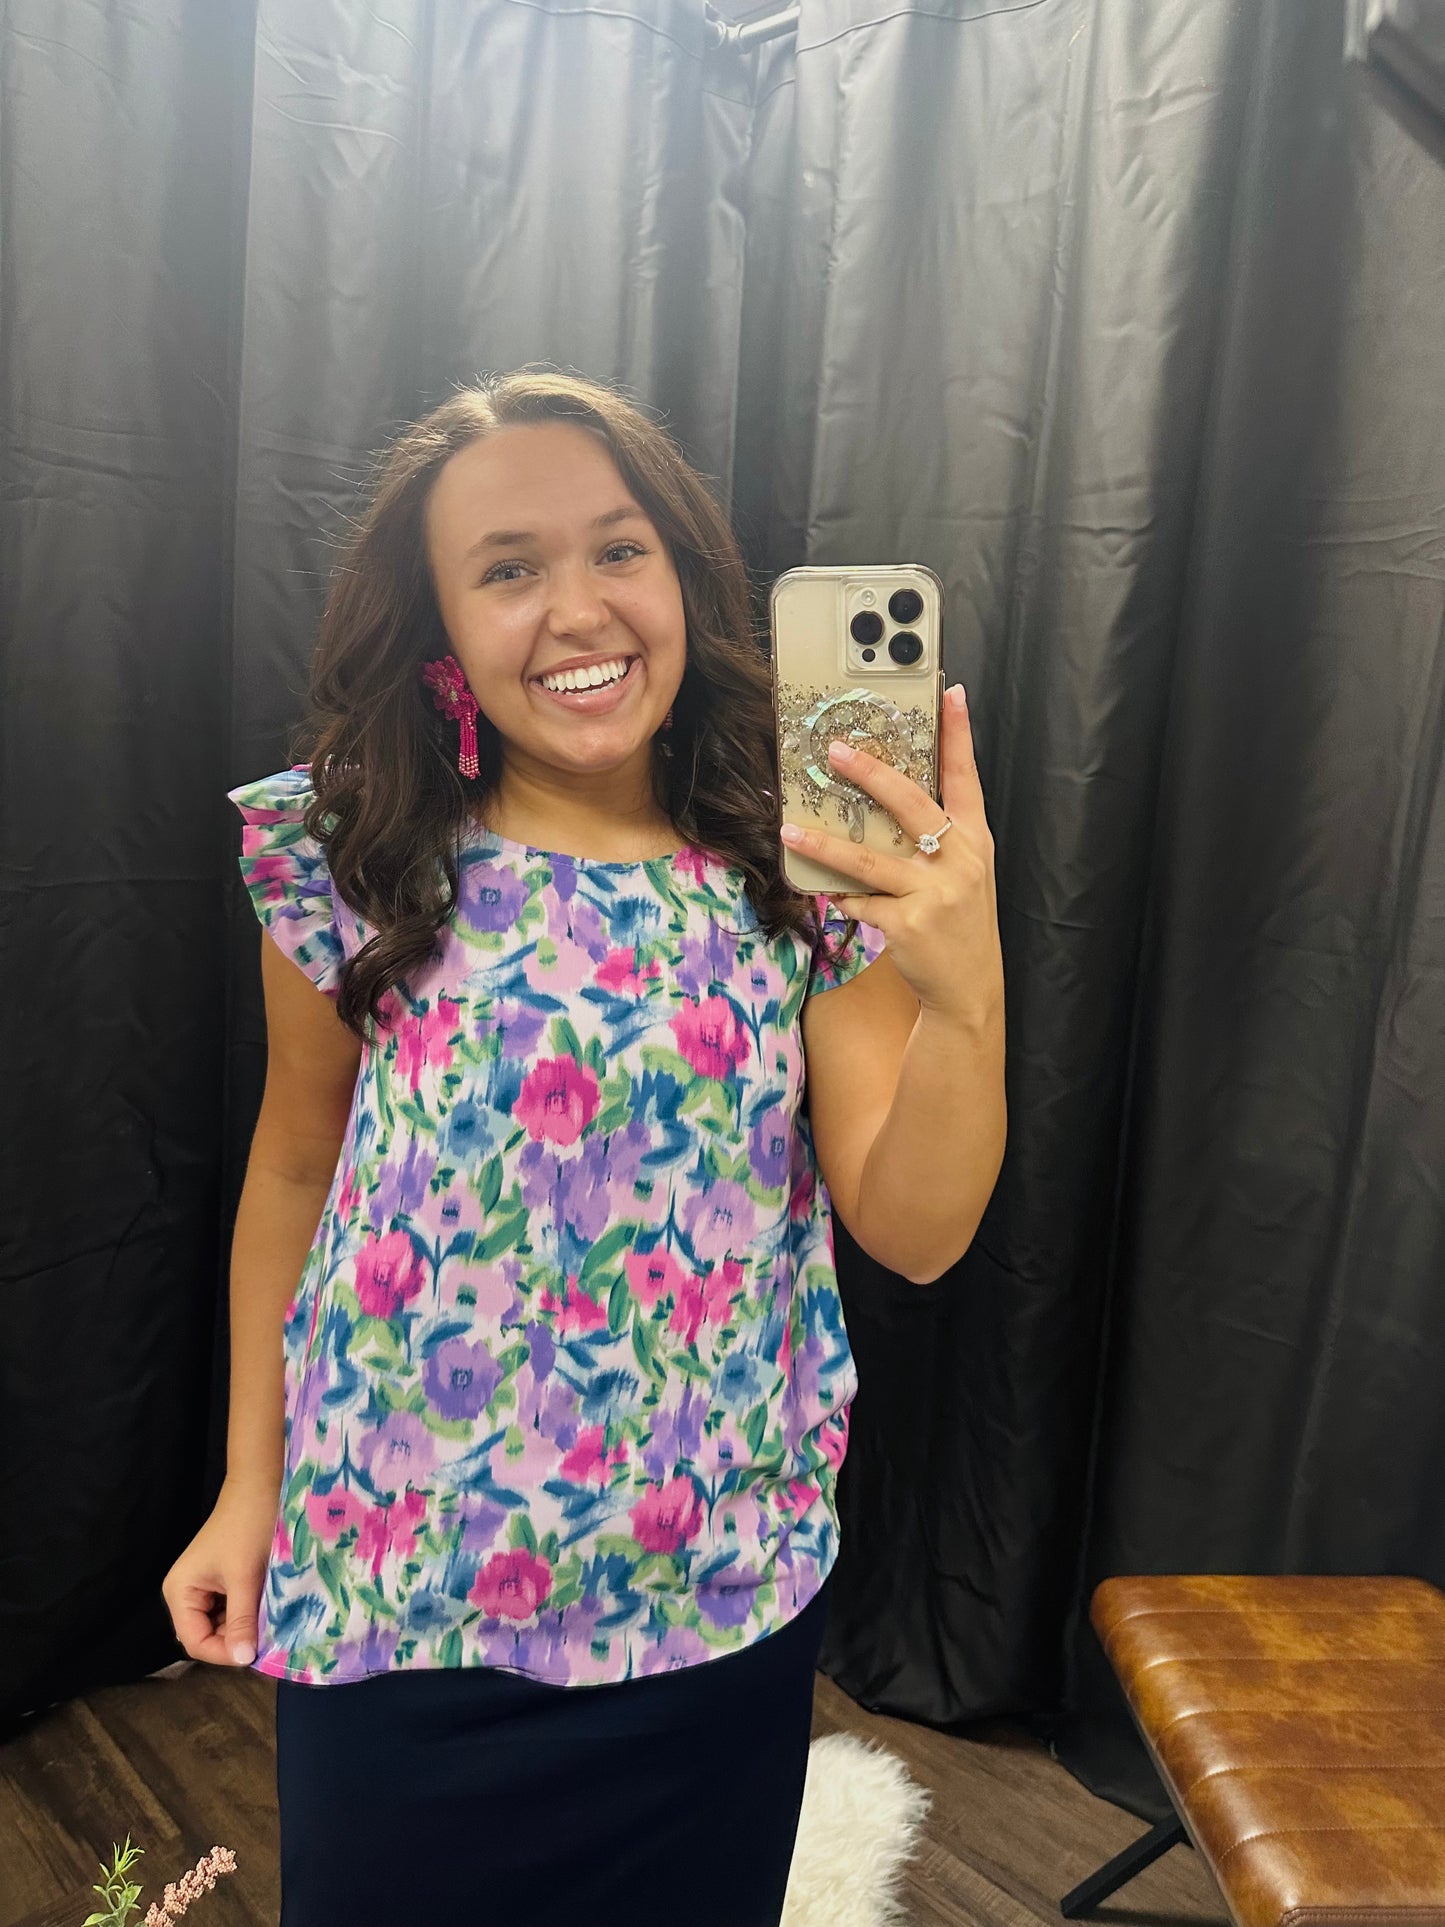 The Lilac Floral Print Top